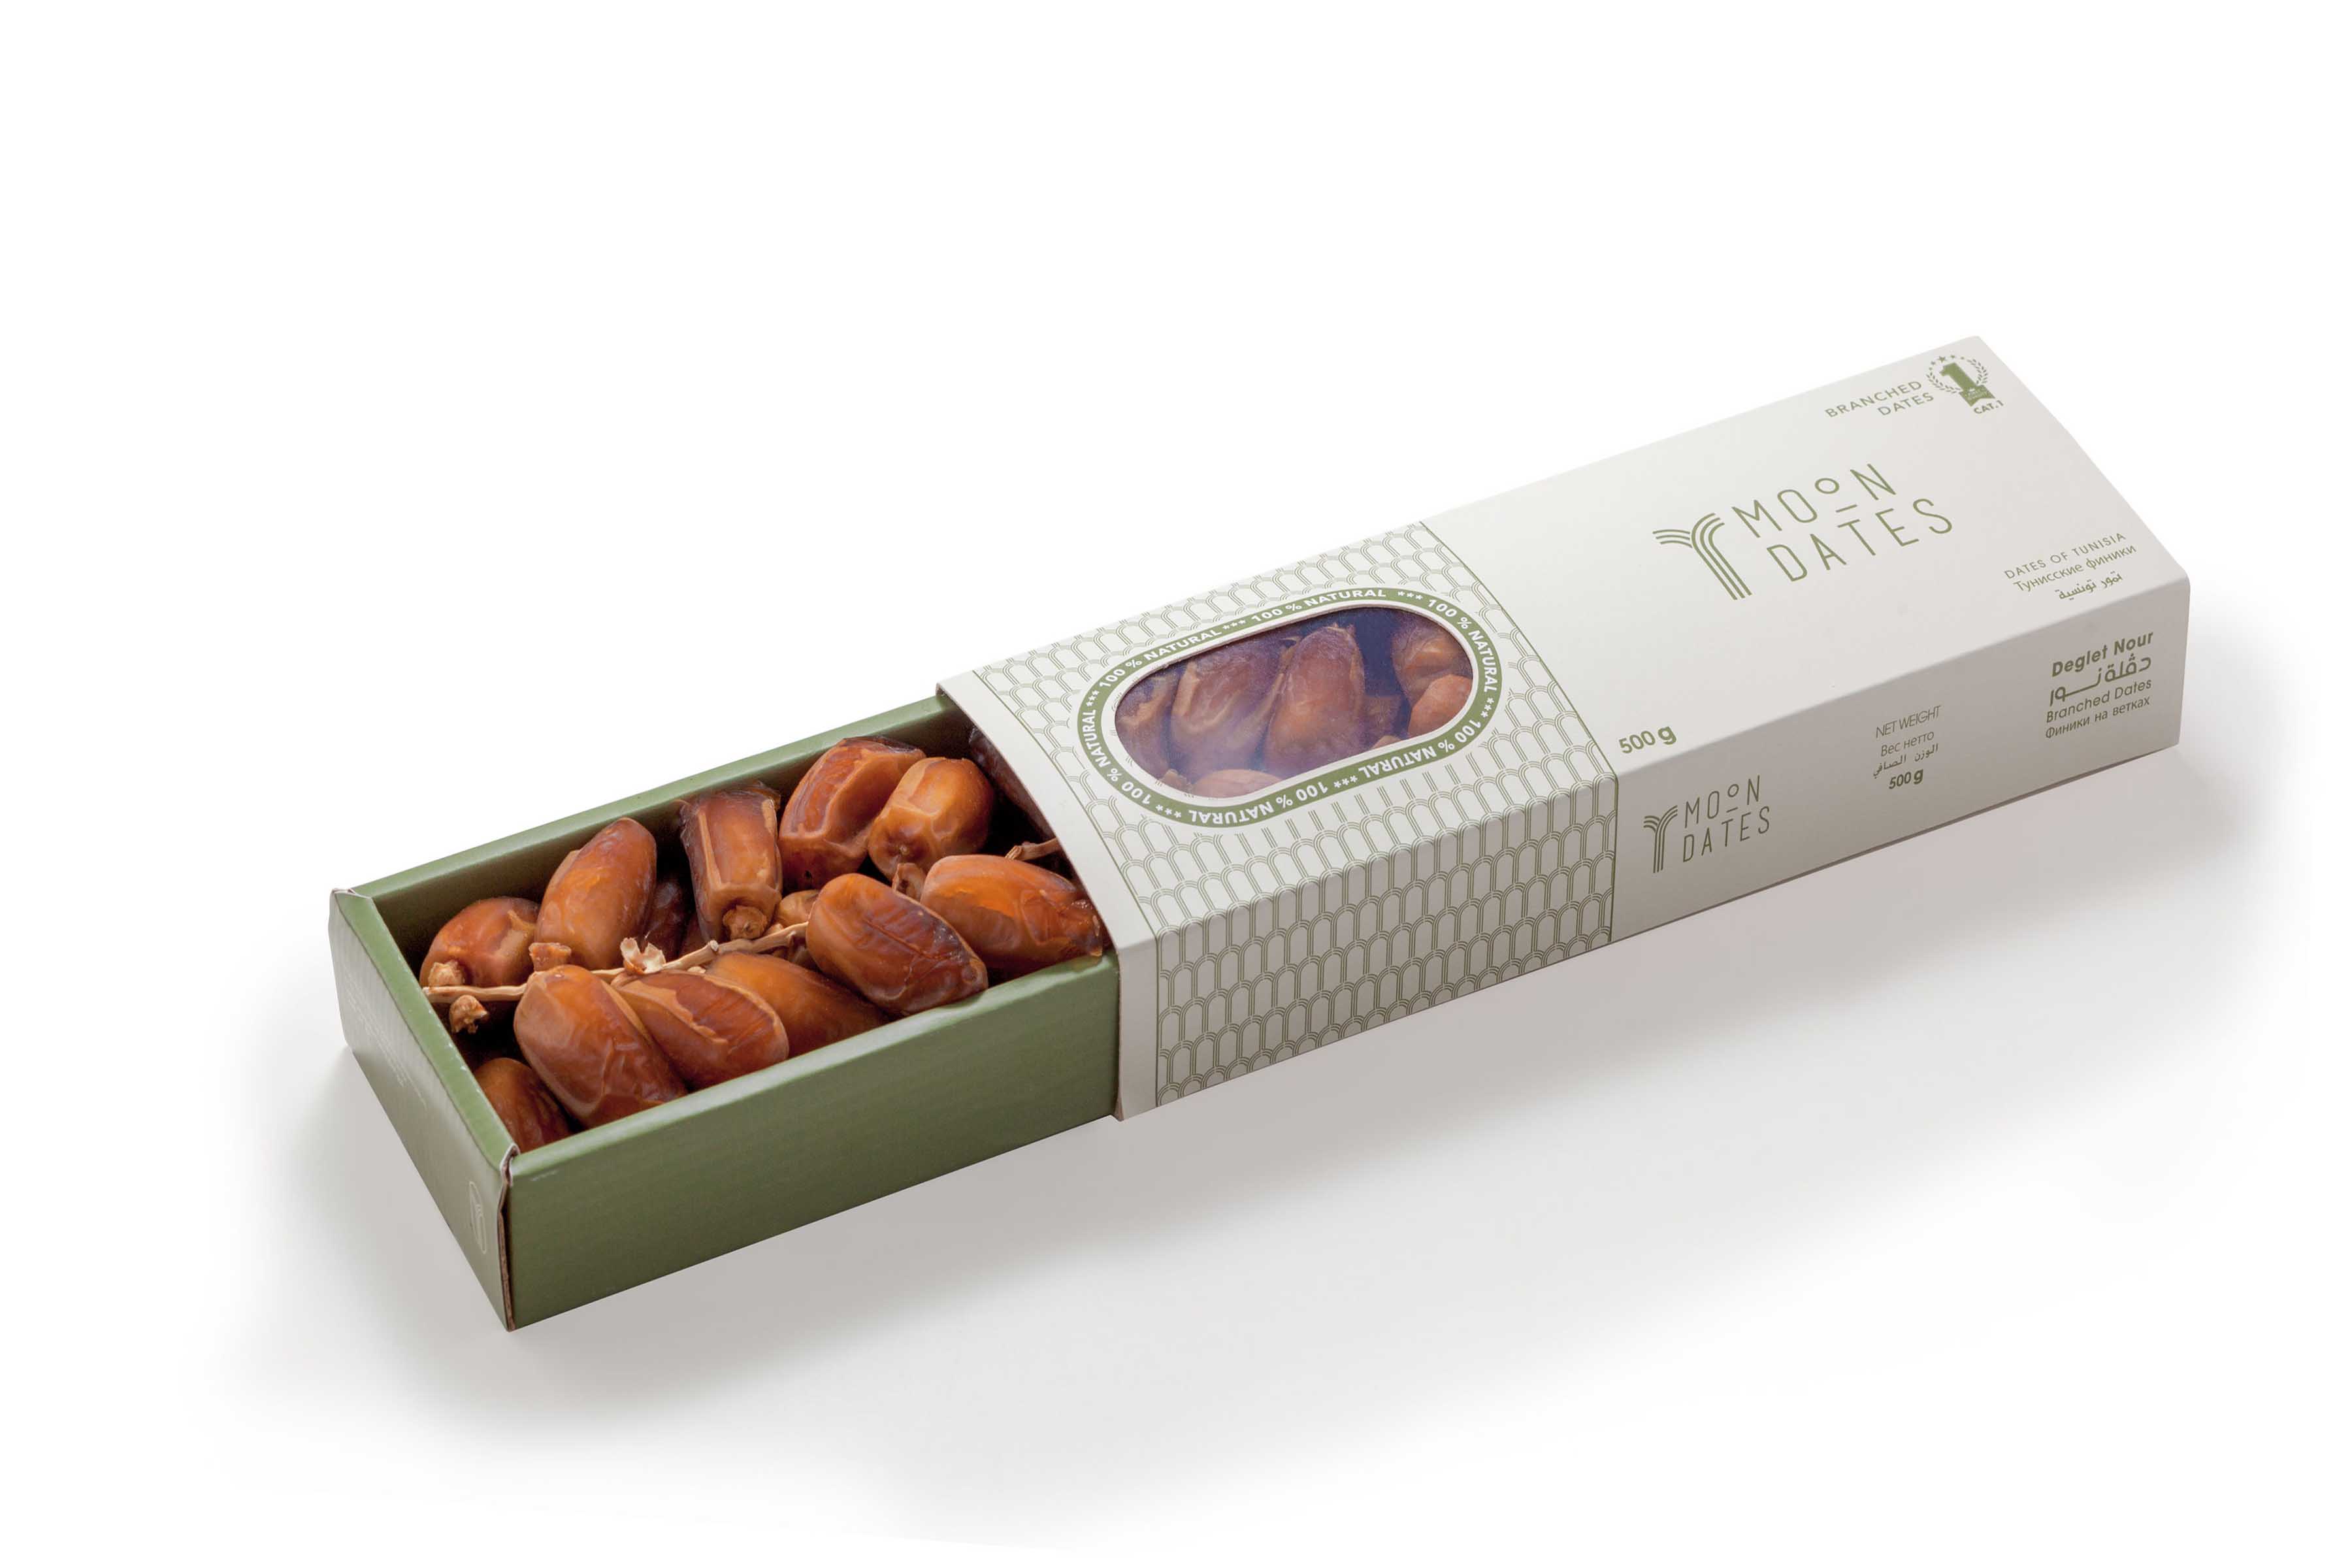 Moon Dates Branched Dates 500gm